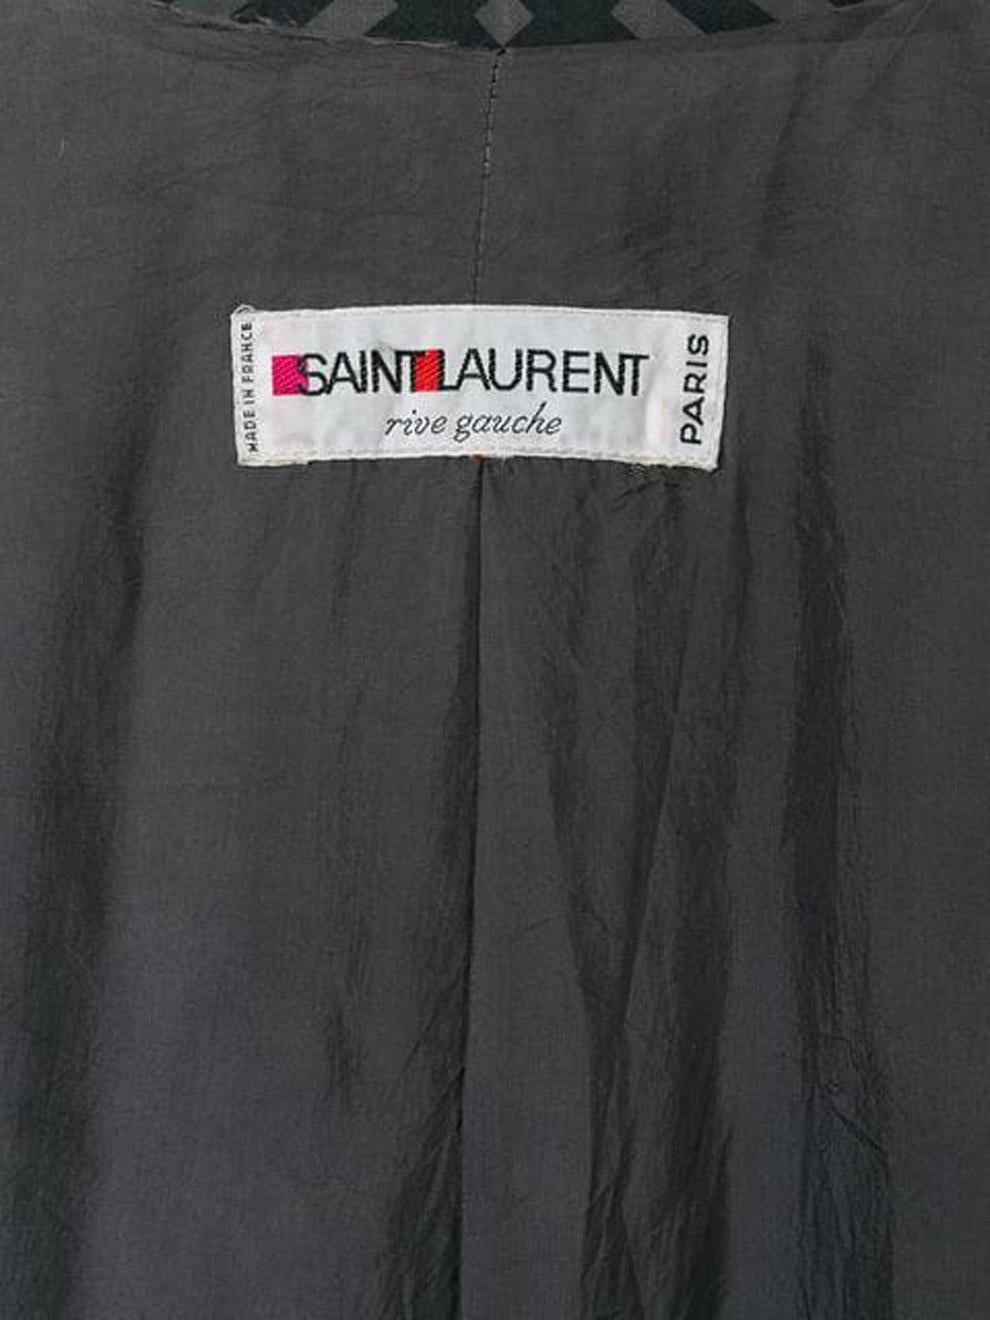 Yves Saint Laurent Graphic Cotton Trench Coat Black and Grey 1